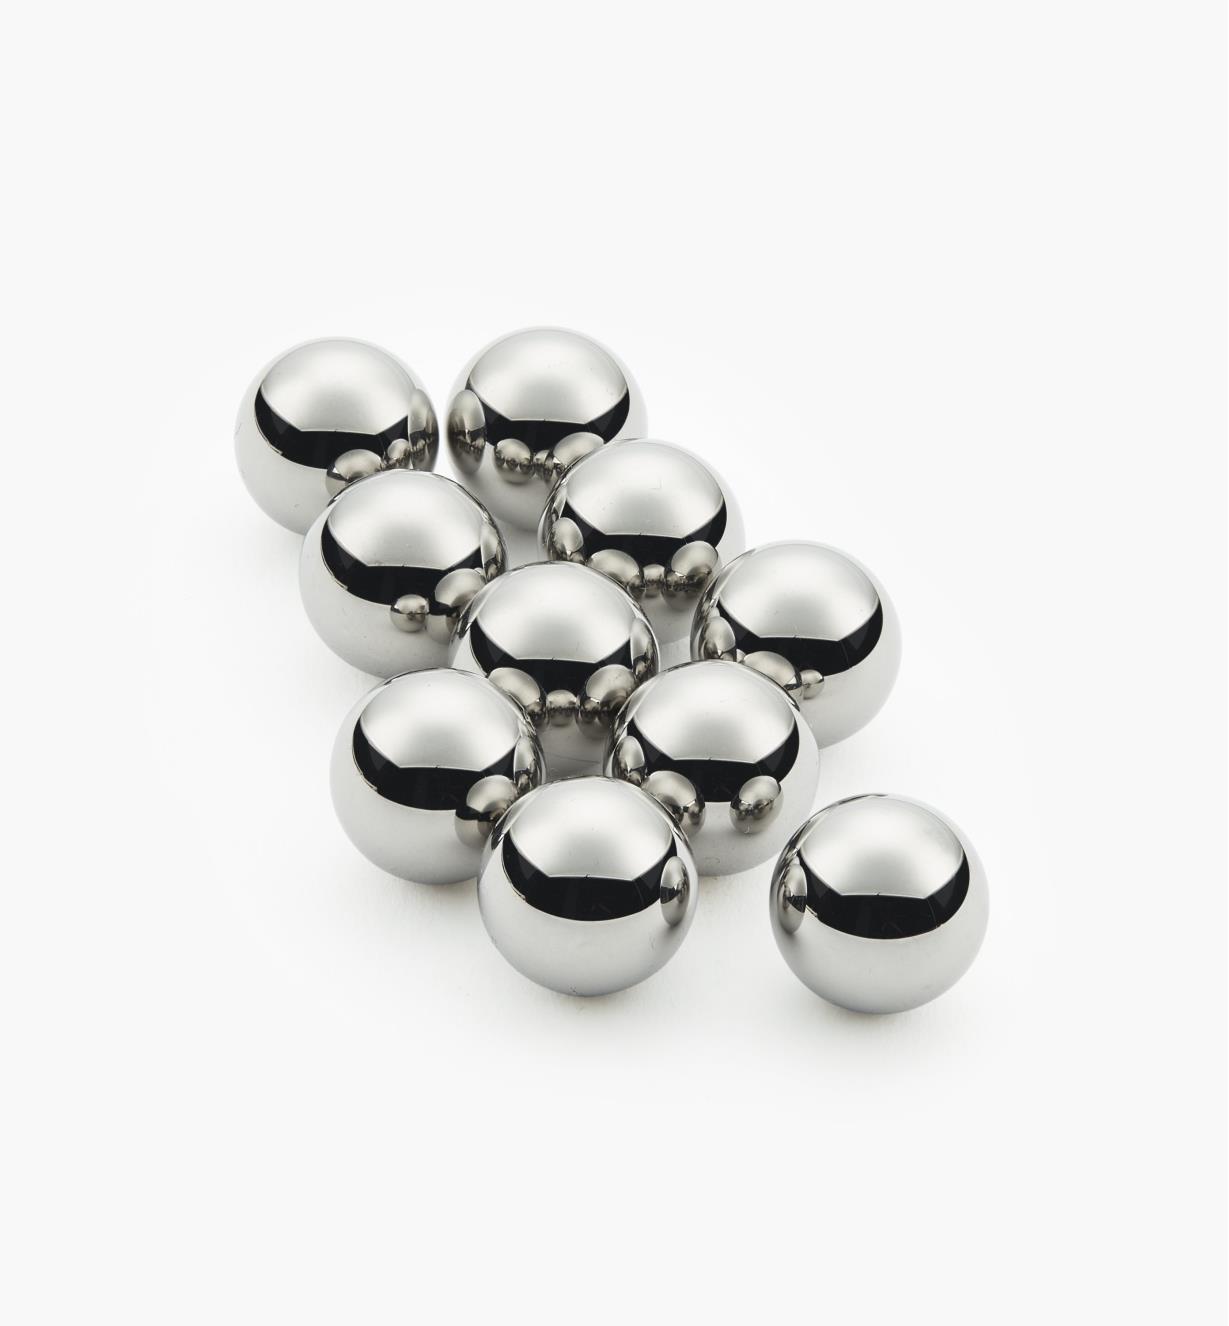 Stainless Steel Balls 9042A 